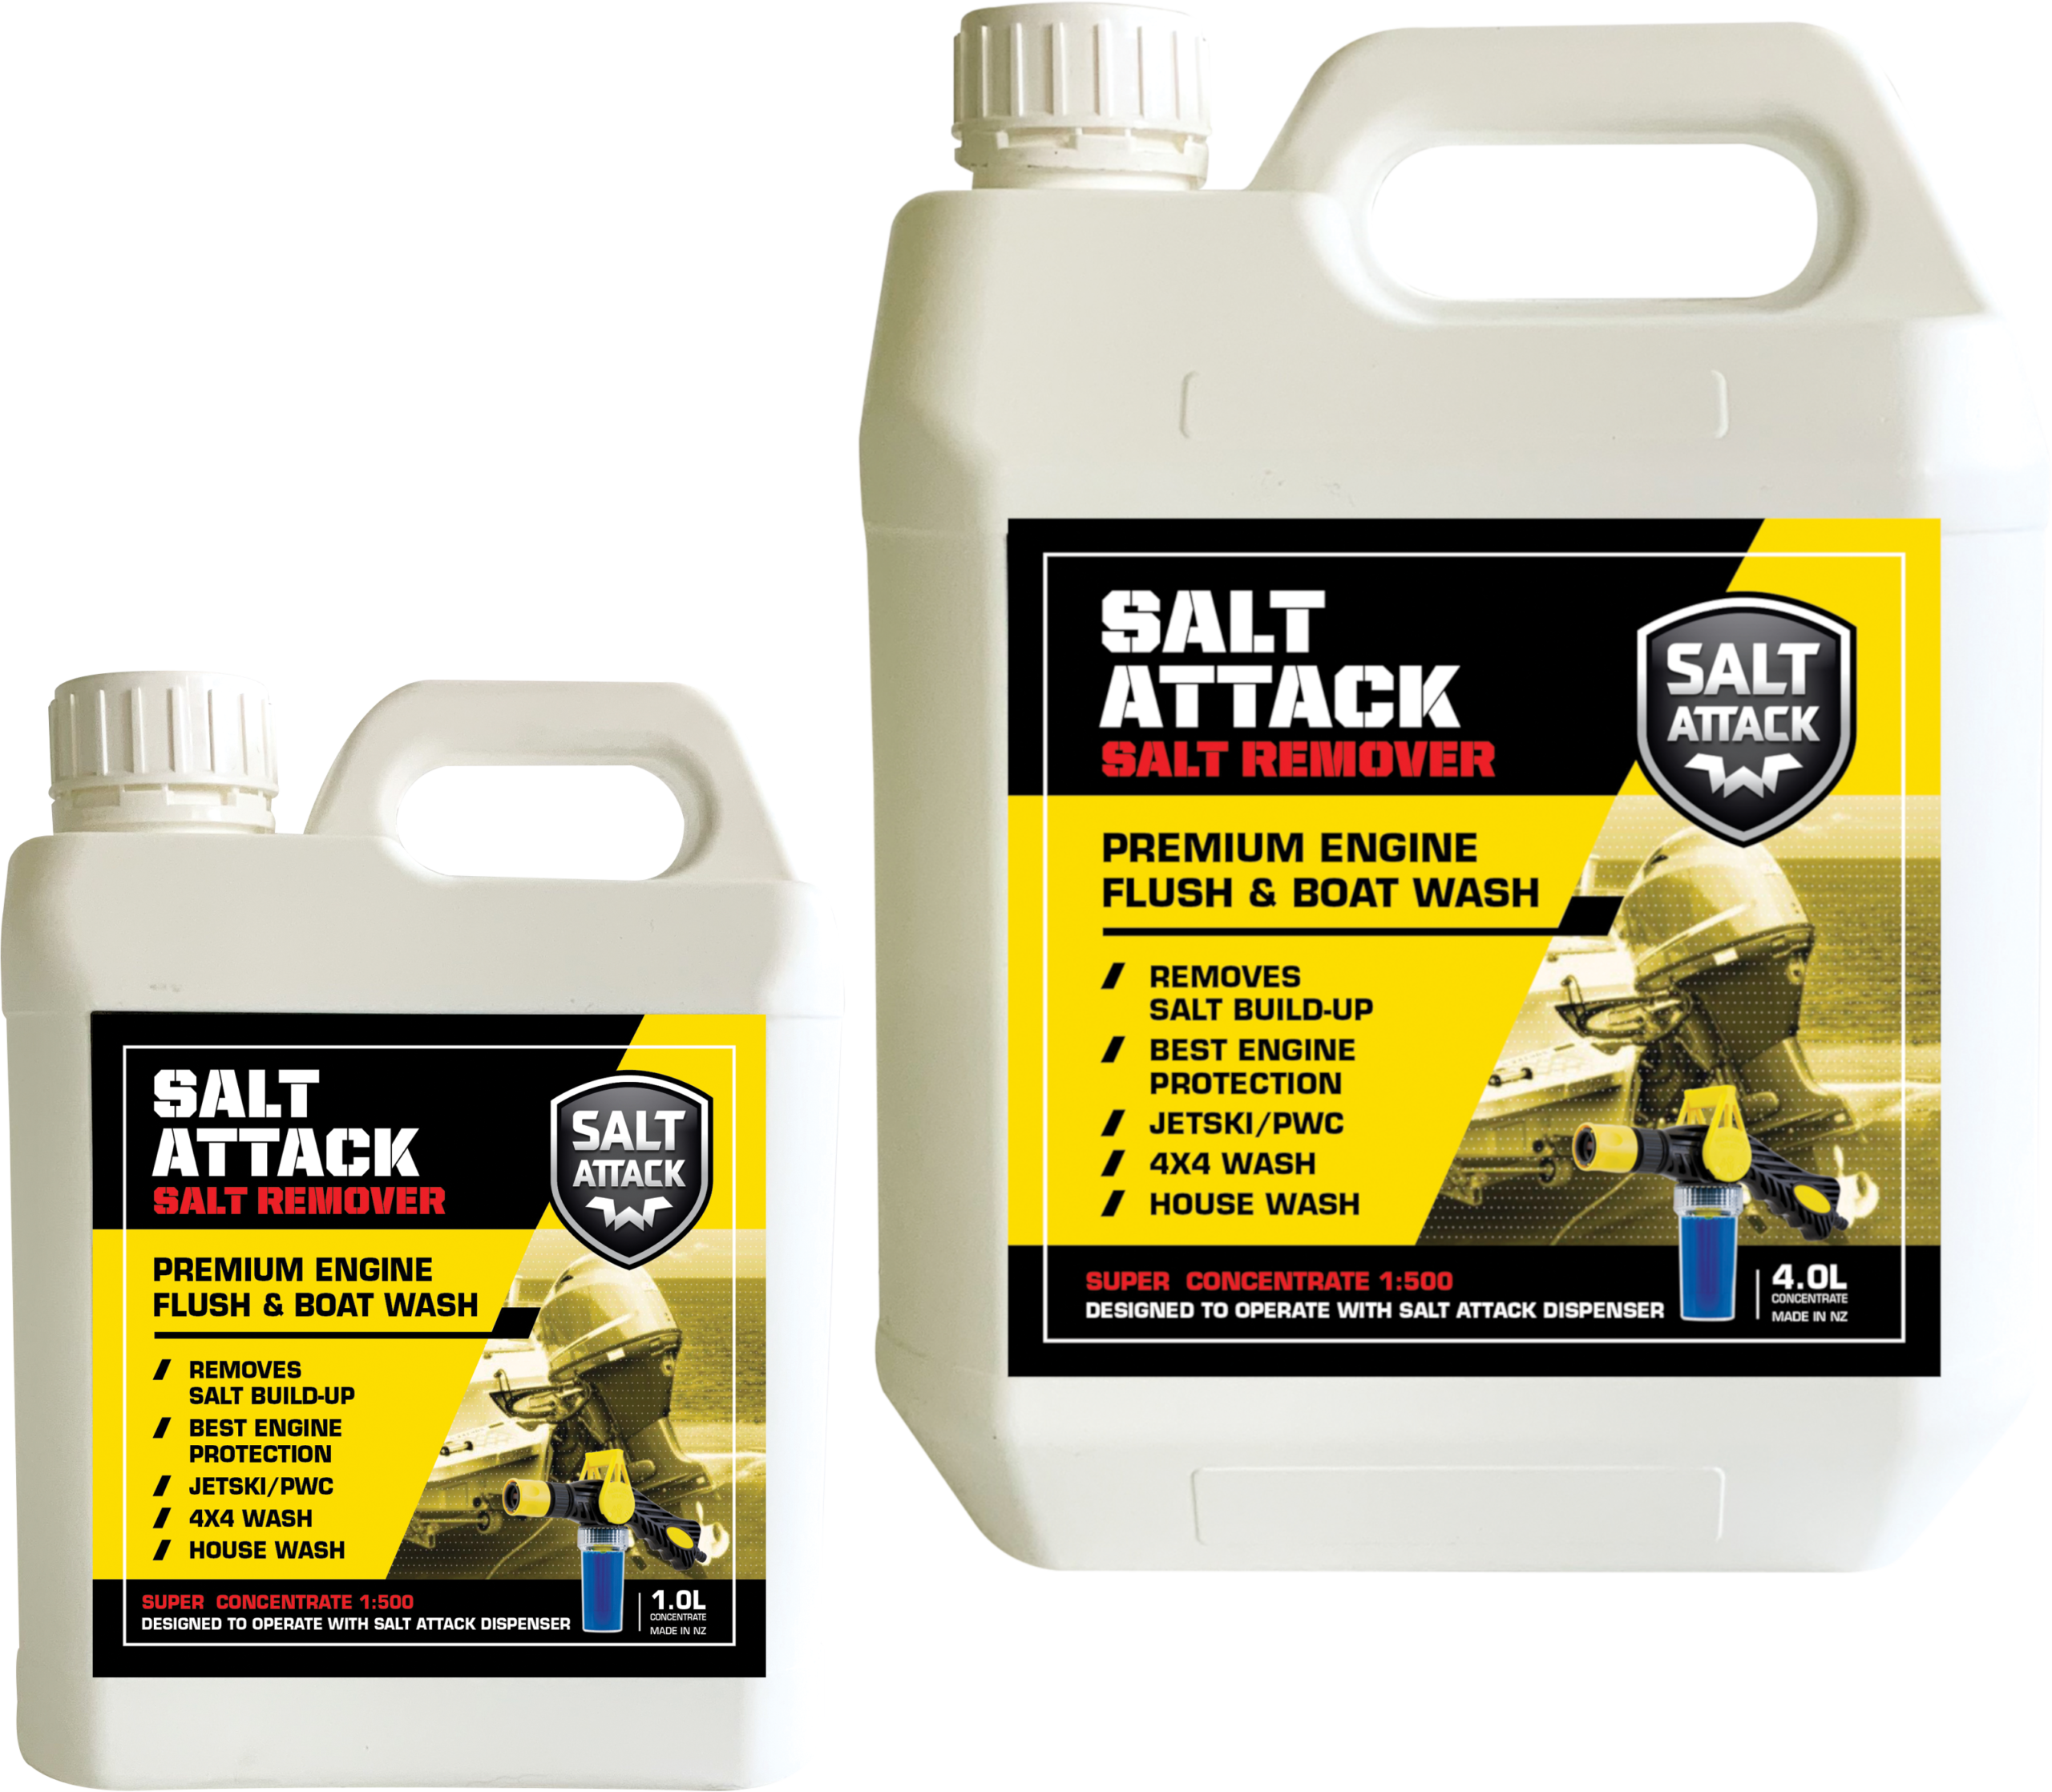 Shop Salt Corrosion Solutions In NZ